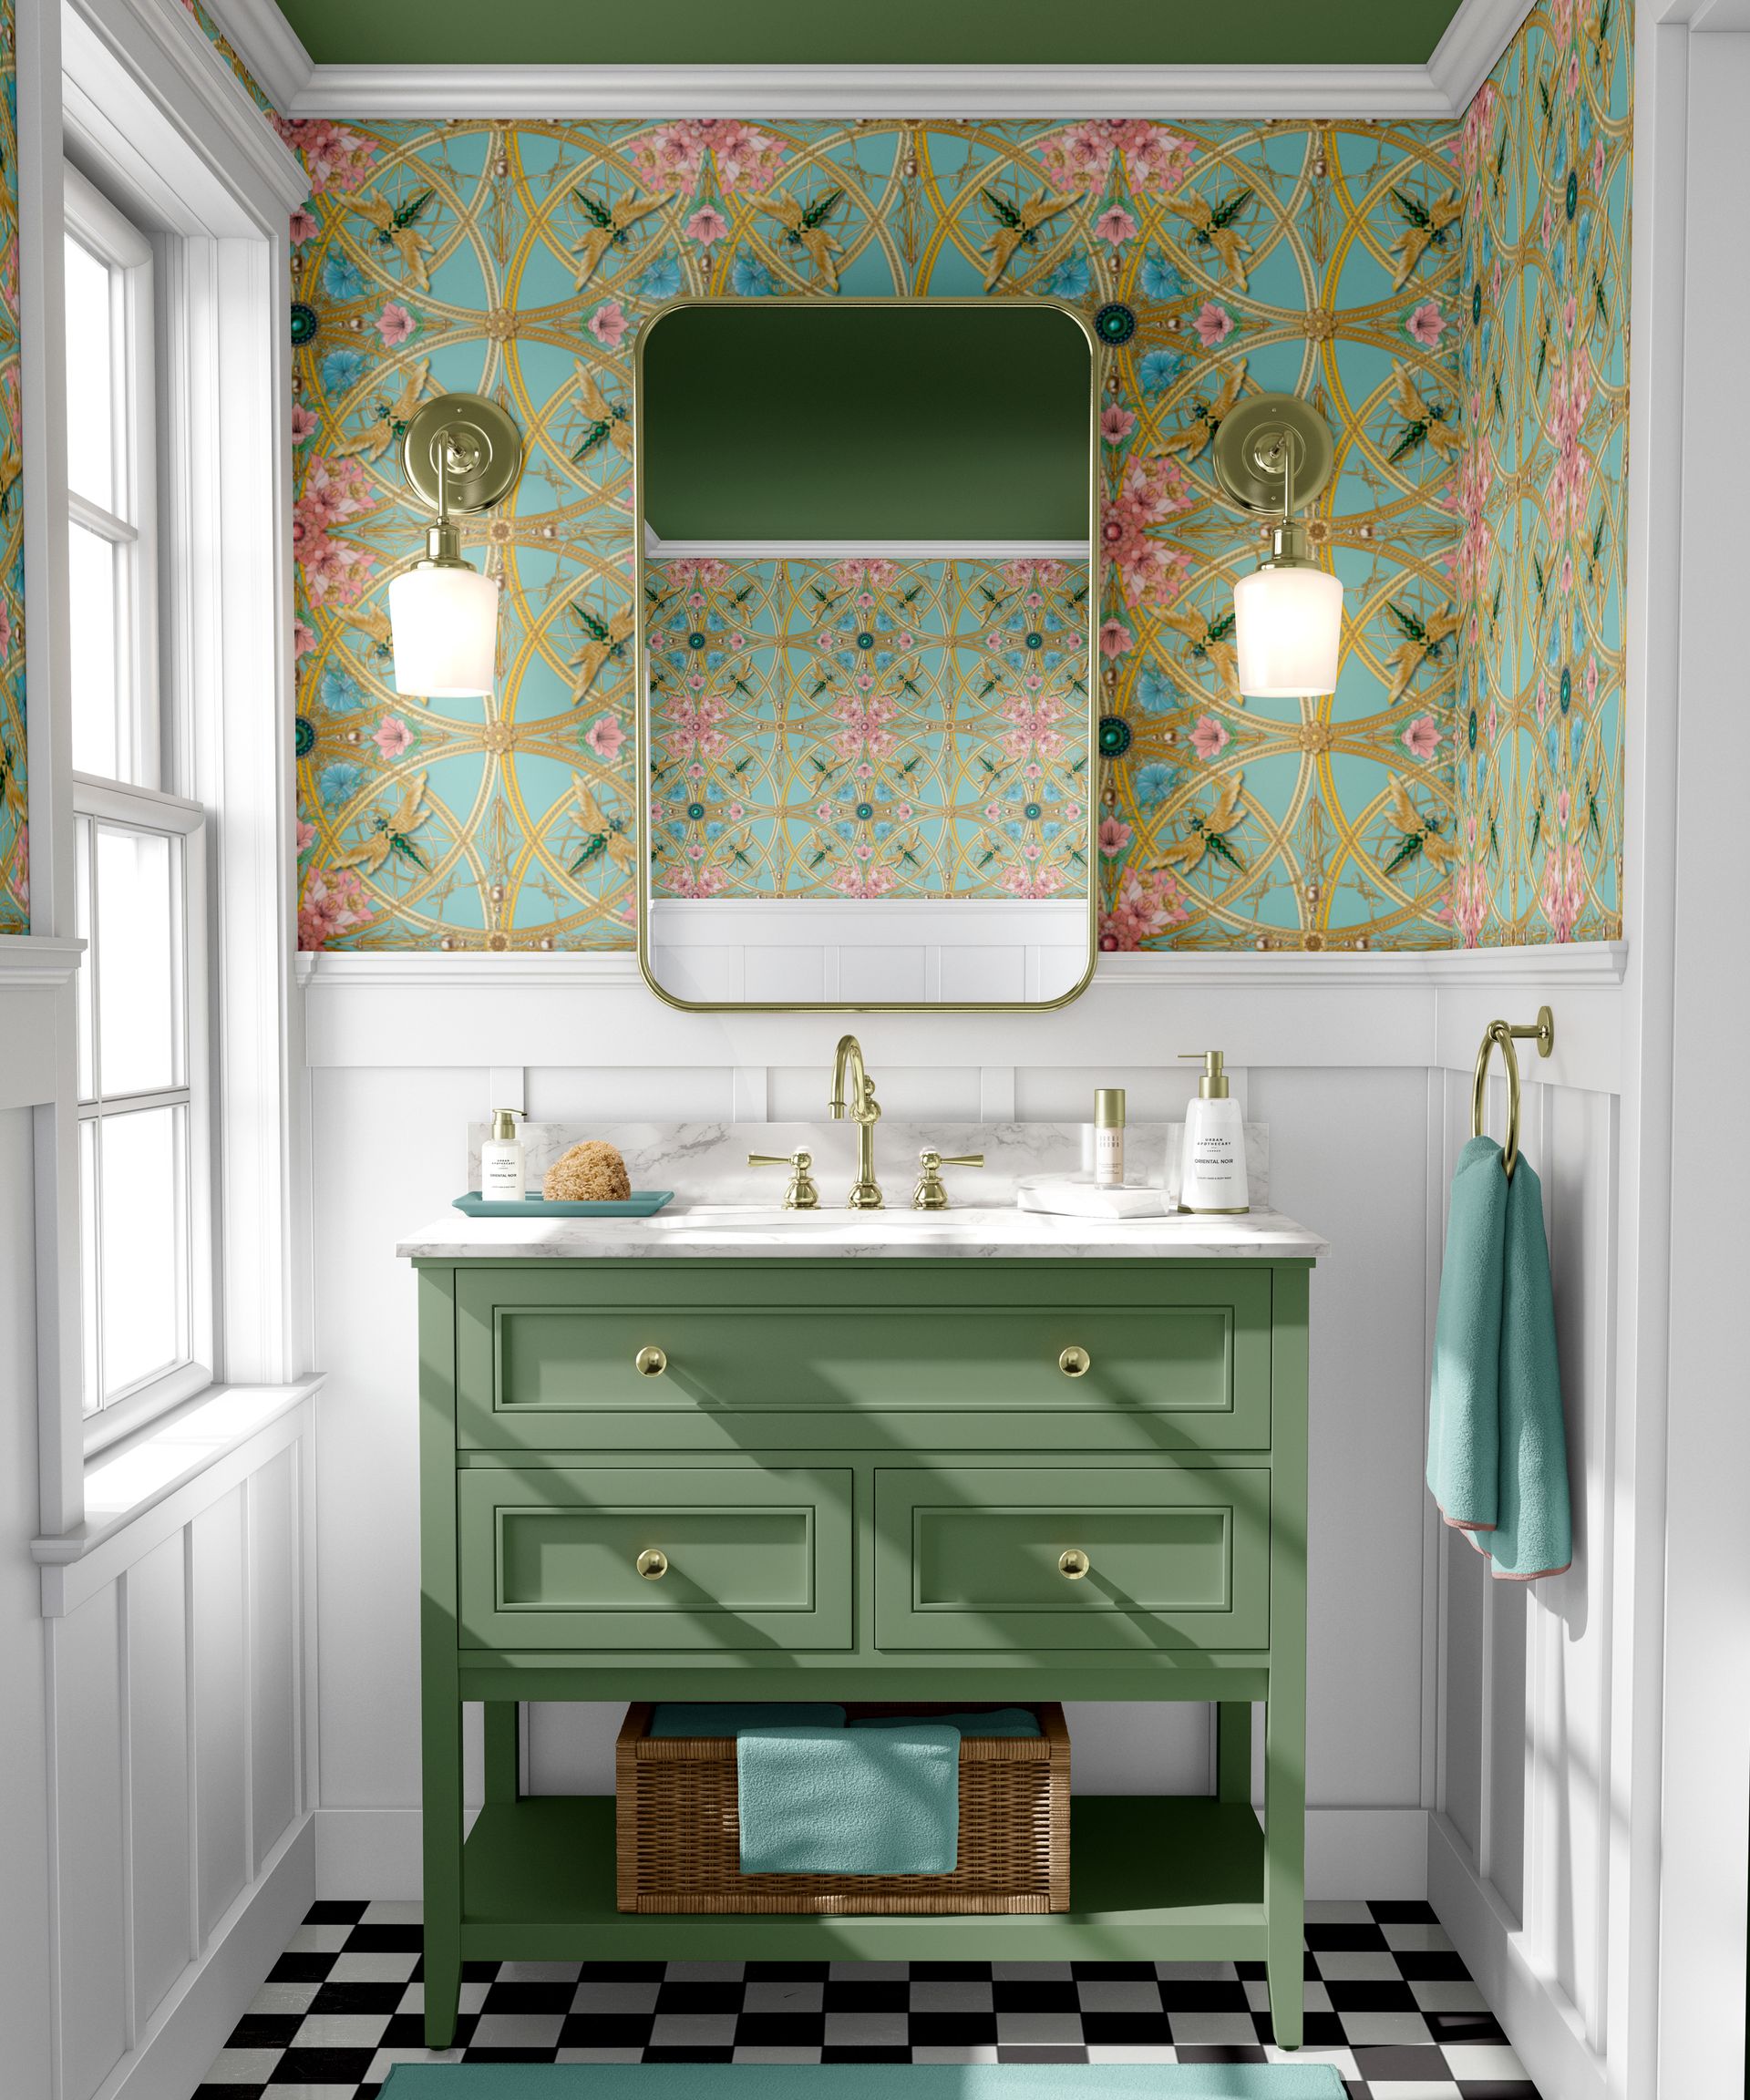 Colorful bathrooms - experts discuss the craze for rainbow sanitaryware ...